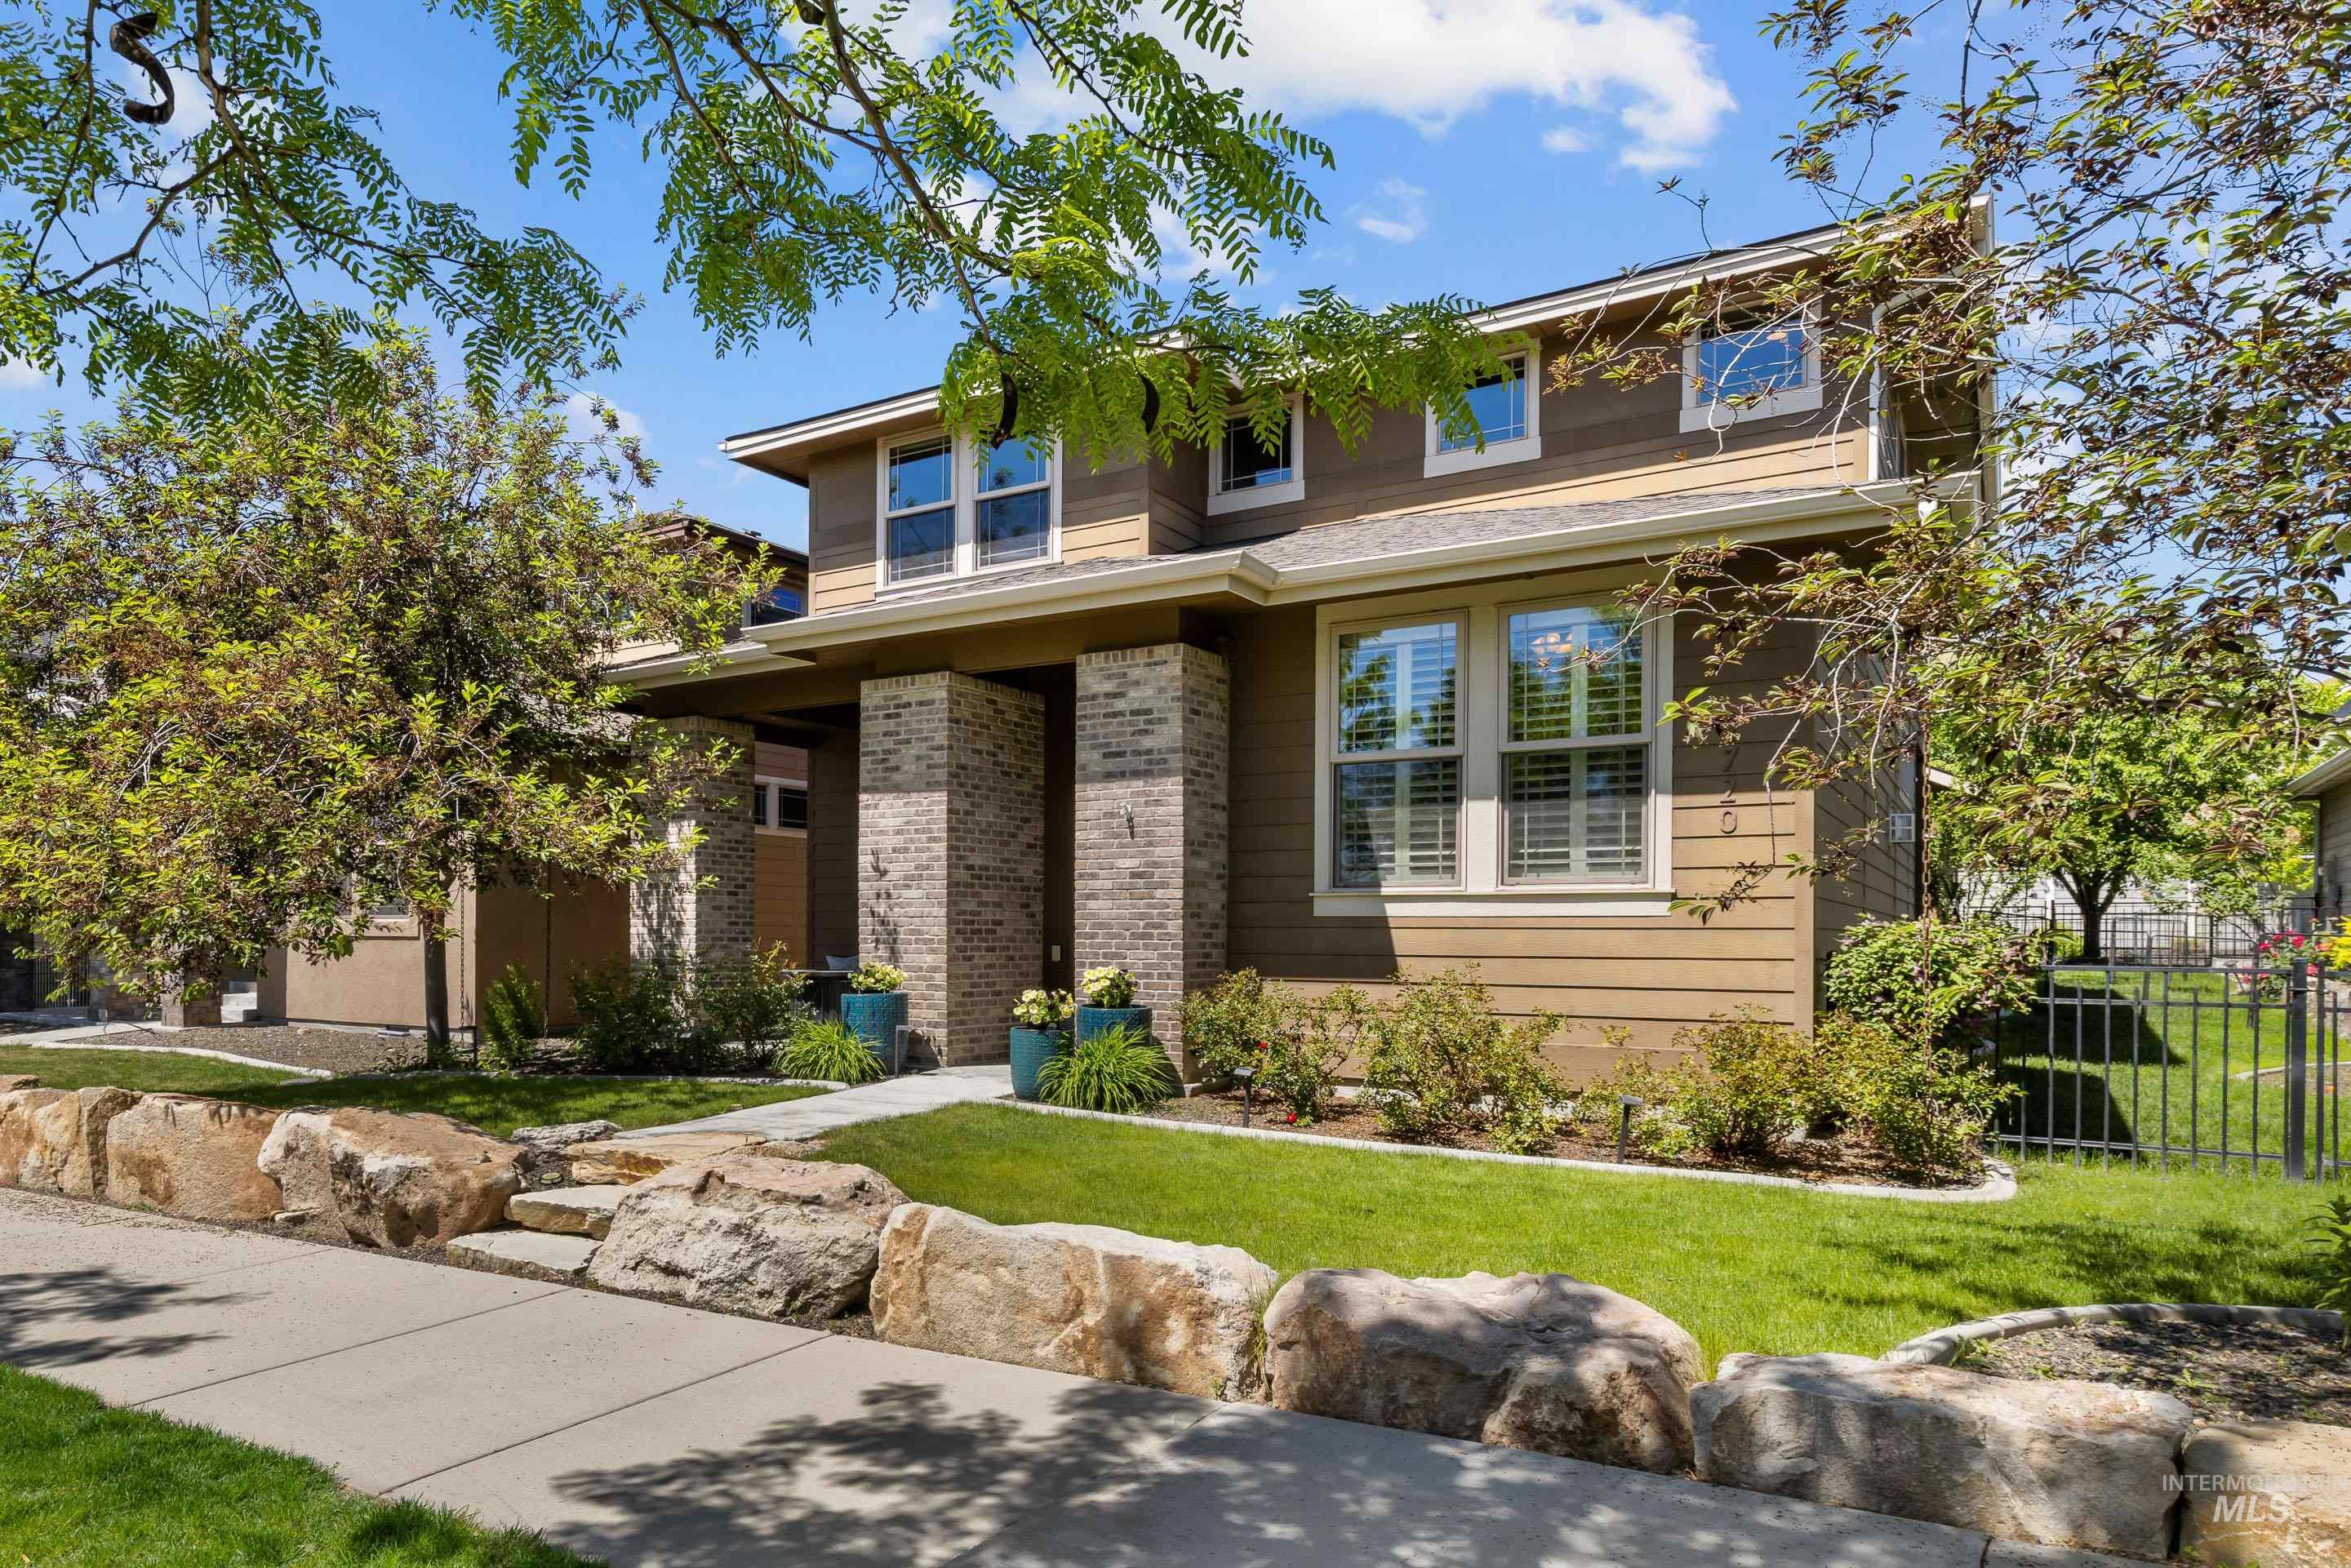 2720 S Palmatier Way, Boise, Idaho 83716, 4 Bedrooms, 2.5 Bathrooms, Residential For Sale, Price $767,000,MLS 98910900